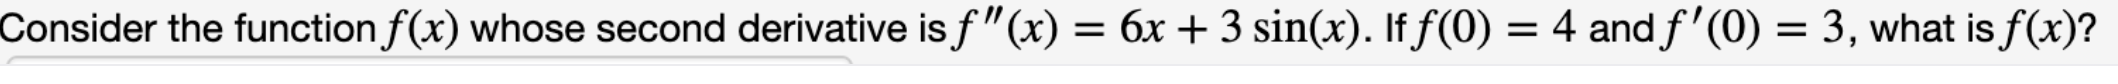 Consider the function f(x) whose second derivative is f"(x) = 6x + 3 sin(x). If f(0) = 4 and f'(0) = 3, what is f(x)?
